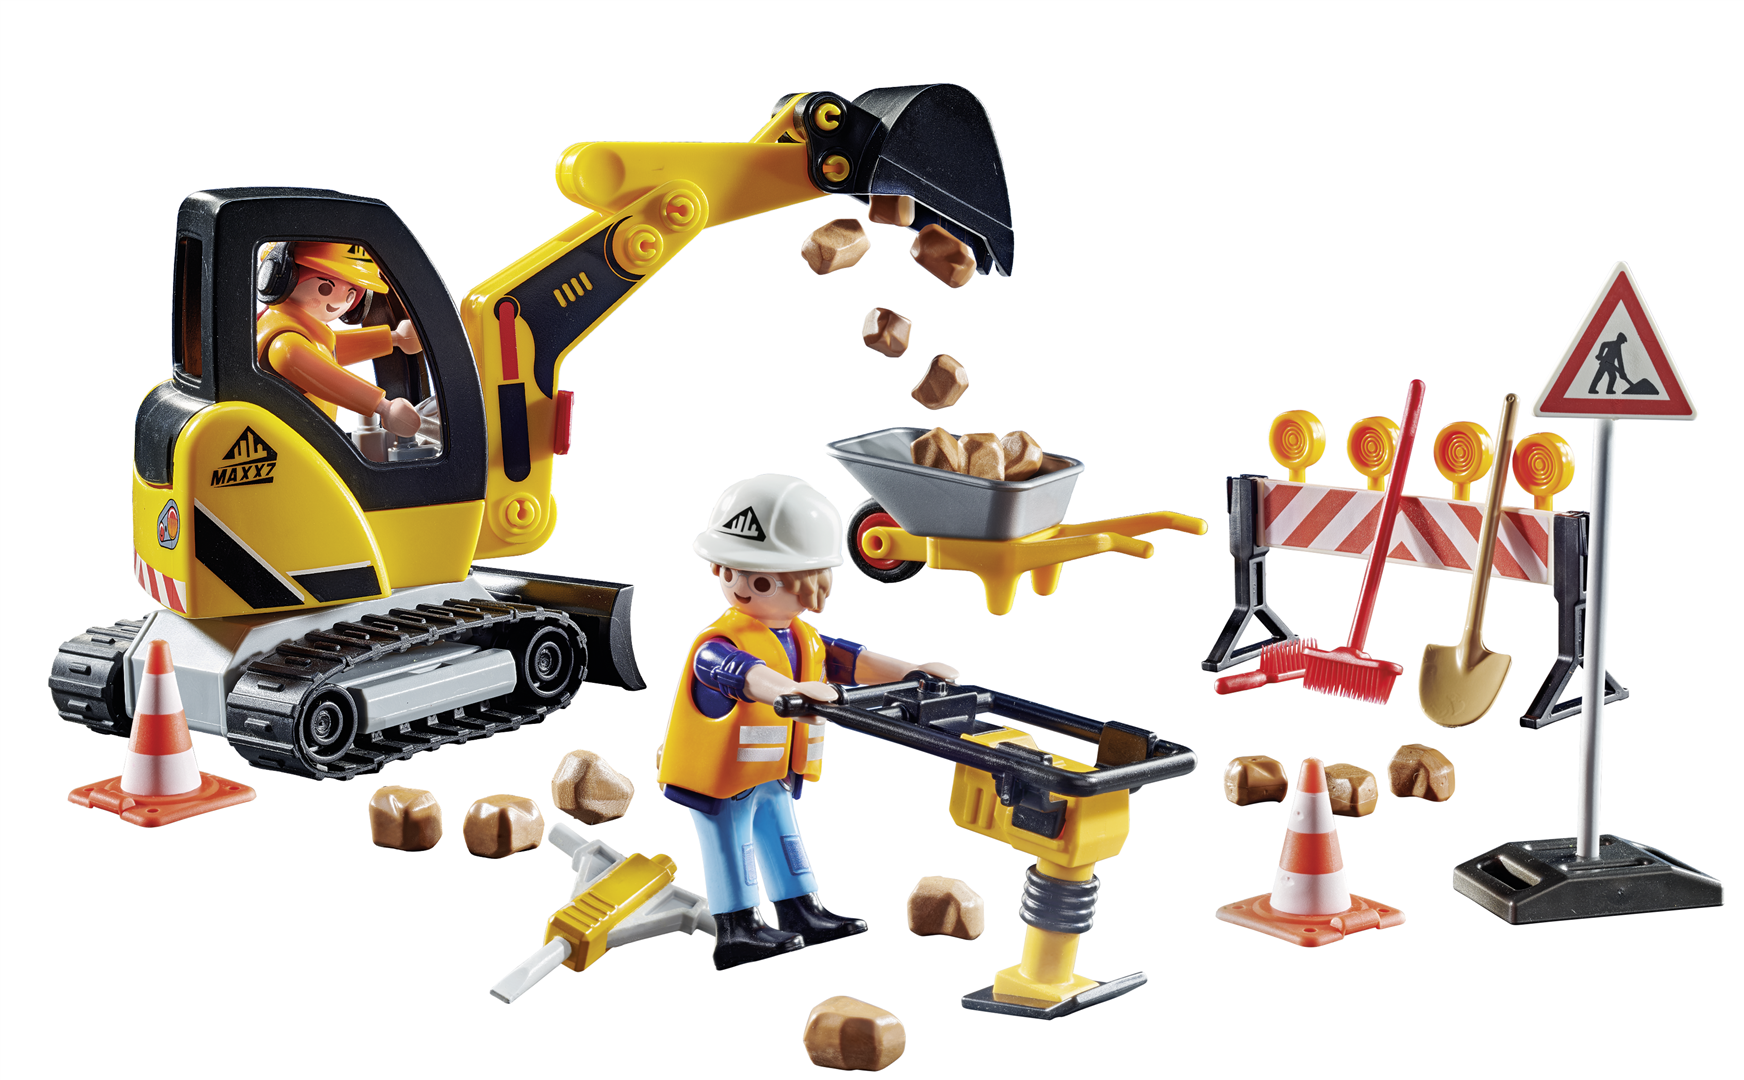 Playmobil city action promo pack cantiere stradale per bambini dai 4 anni in su - Playmobil